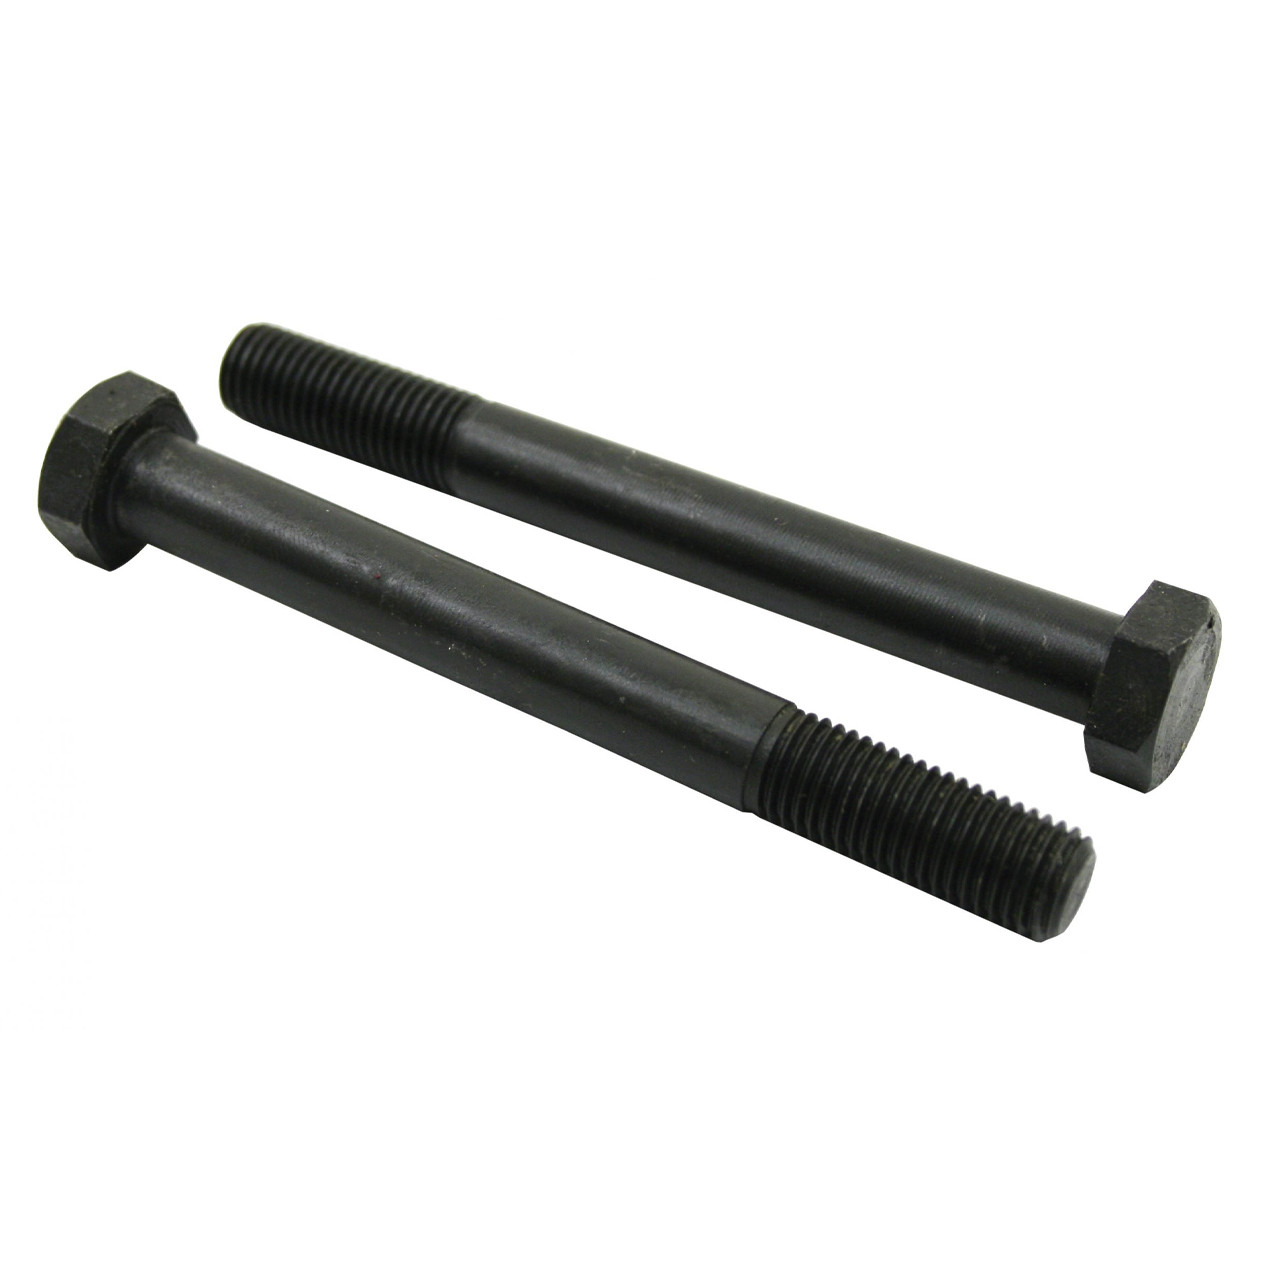 BB-095 Beetle Rear mounting bolts for body to chassis